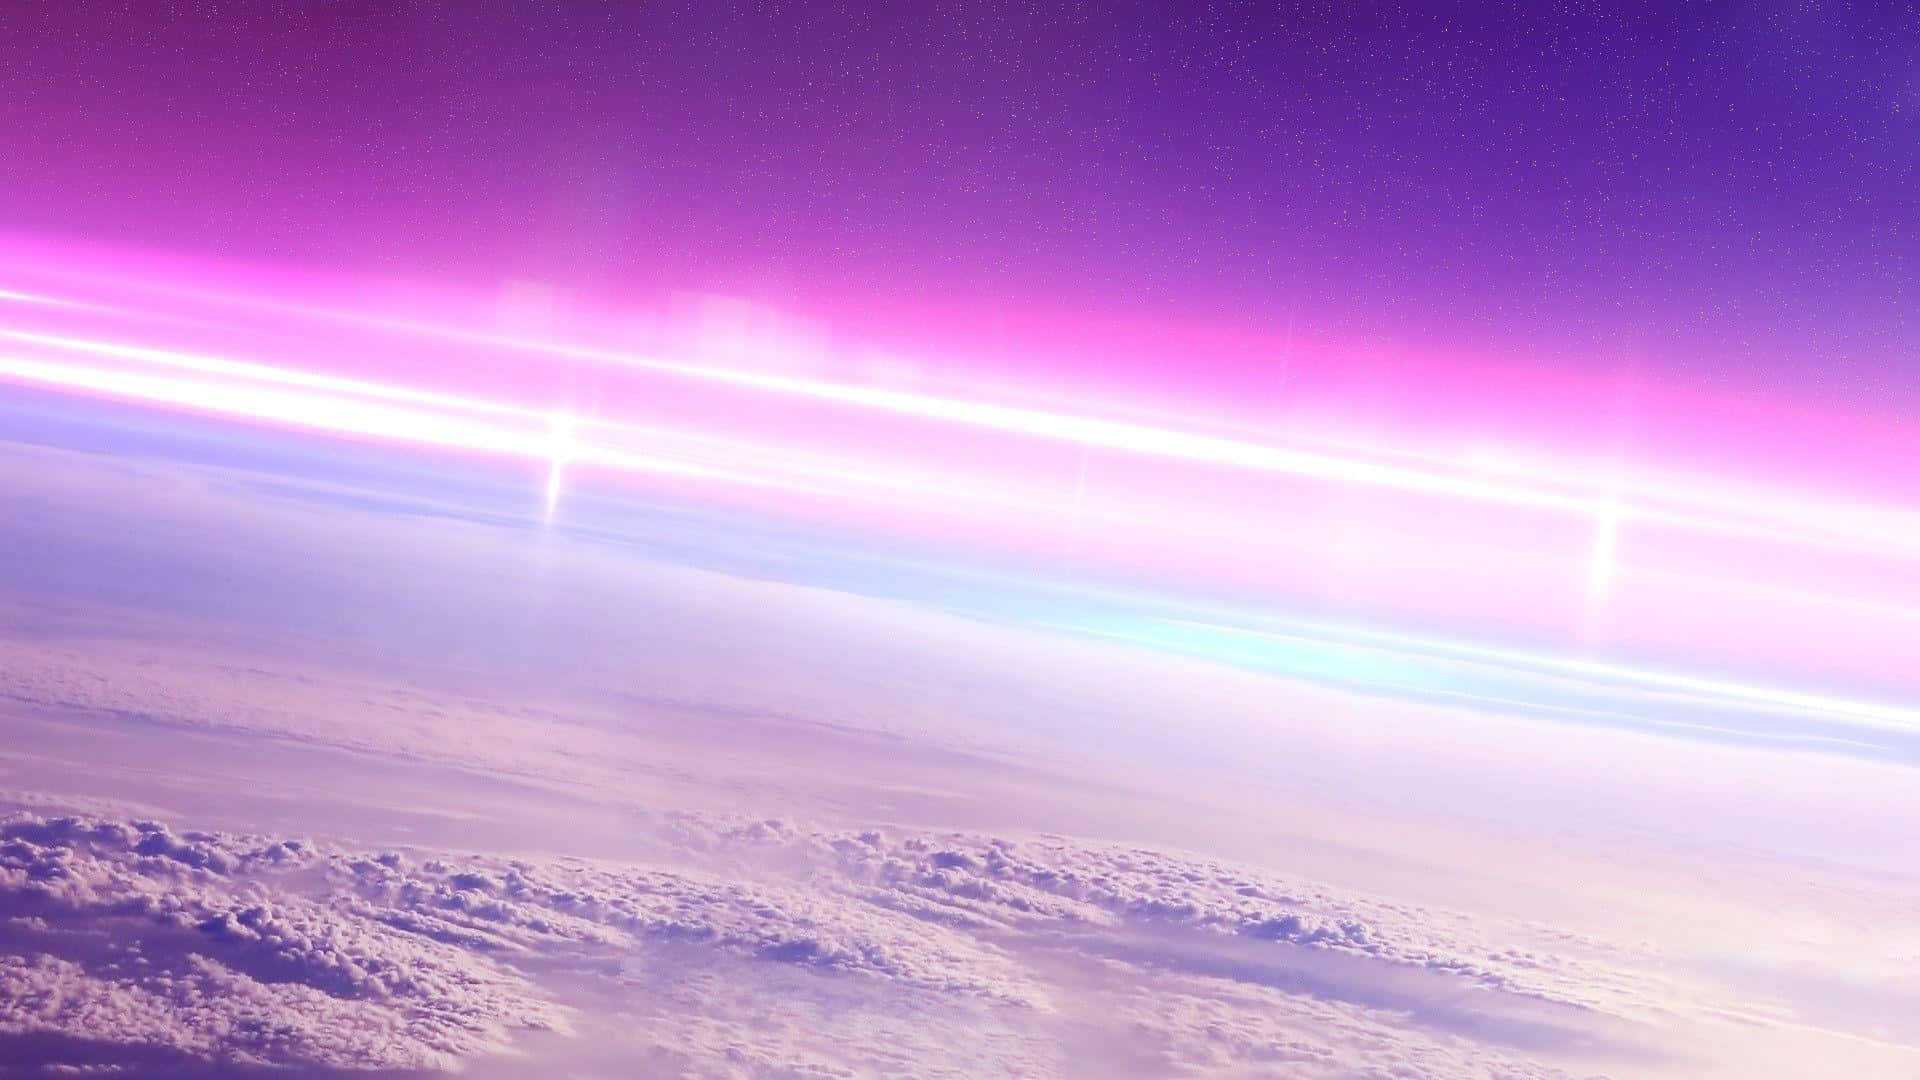 A Purple Light Shining From Space